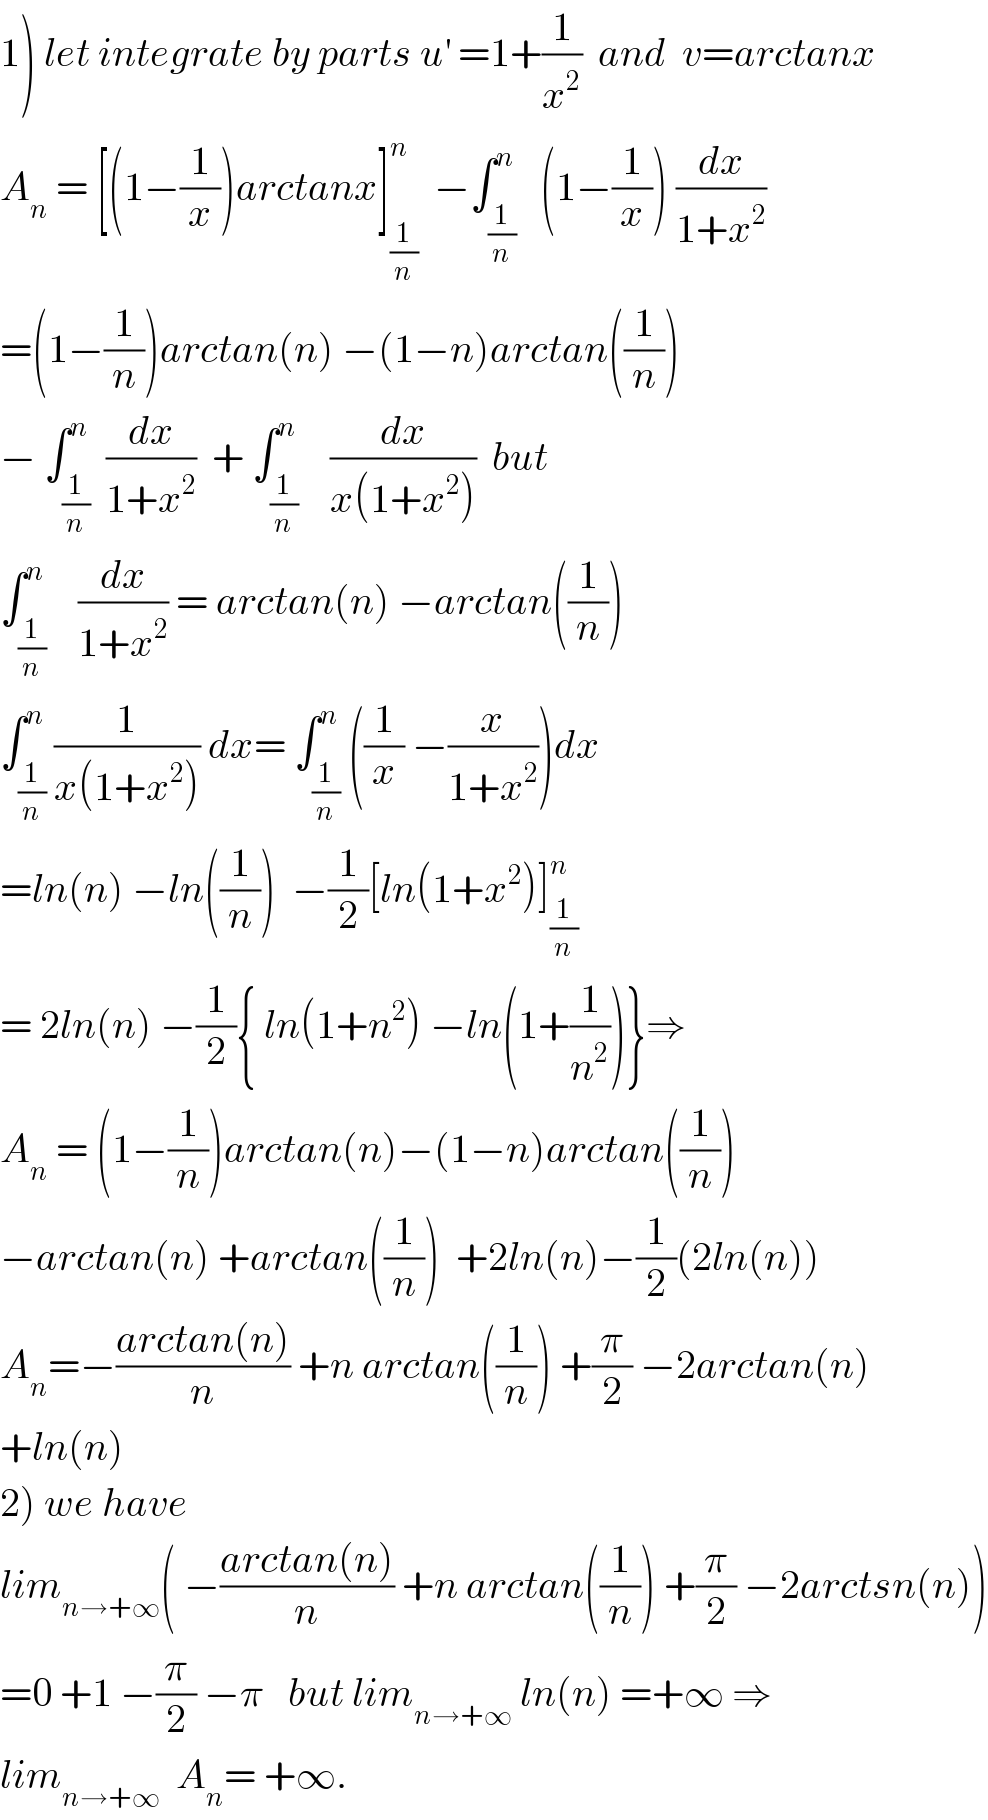 1) let integrate by parts u^′  =1+(1/x^2 )  and  v=arctanx  A_n  = [(1−(1/x))arctanx]_(1/n) ^n   −∫_(1/n) ^n   (1−(1/x)) (dx/(1+x^2 ))  =(1−(1/n))arctan(n) −(1−n)arctan((1/n))  − ∫_(1/n) ^n  (dx/(1+x^2 ))  + ∫_(1/n) ^n    (dx/(x(1+x^2 )))  but  ∫_(1/n) ^n    (dx/(1+x^2 )) = arctan(n) −arctan((1/n))  ∫_(1/n) ^n (1/(x(1+x^2 ))) dx= ∫_(1/n) ^n ((1/x) −(x/(1+x^2 )))dx  =ln(n) −ln((1/n))  −(1/2)[ln(1+x^2 )]_(1/n) ^n   = 2ln(n) −(1/2){ ln(1+n^2 ) −ln(1+(1/n^2 ))}⇒  A_n  = (1−(1/n))arctan(n)−(1−n)arctan((1/n))  −arctan(n) +arctan((1/n))  +2ln(n)−(1/2)(2ln(n))  A_n =−((arctan(n))/n) +n arctan((1/n)) +(π/2) −2arctan(n)  +ln(n)  2) we have  lim_(n→+∞) ( −((arctan(n))/n) +n arctan((1/n)) +(π/2) −2arctsn(n))  =0 +1 −(π/2) −π   but lim_(n→+∞)  ln(n) =+∞ ⇒  lim_(n→+∞)   A_n = +∞.  